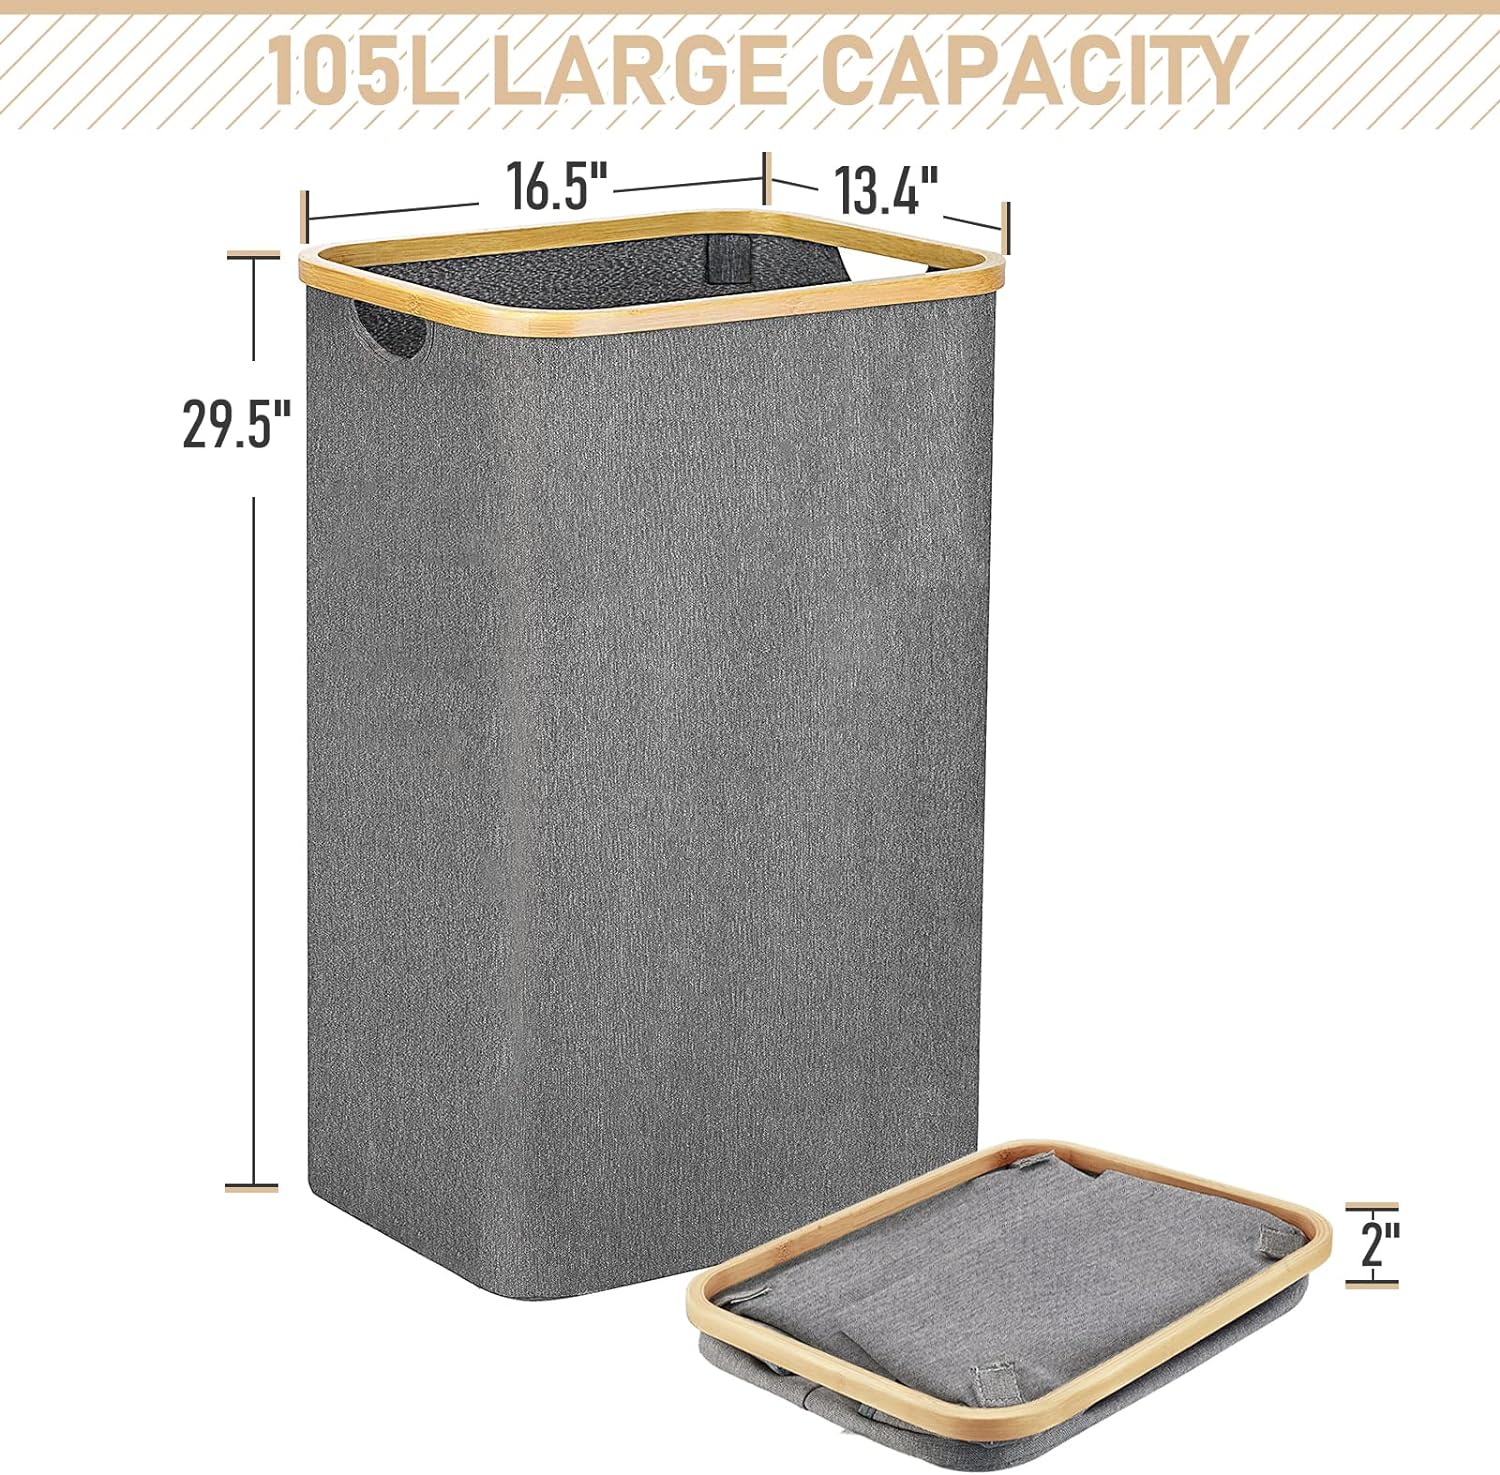 Laundry Room 105L Capacity Dirty Clothes Hampers with Handles for Living Room Collapsible Laundry Baskets with Wheels and Removable Laundry Bag Large Laundry Hamper with Lid Beige+Grey Bedroom